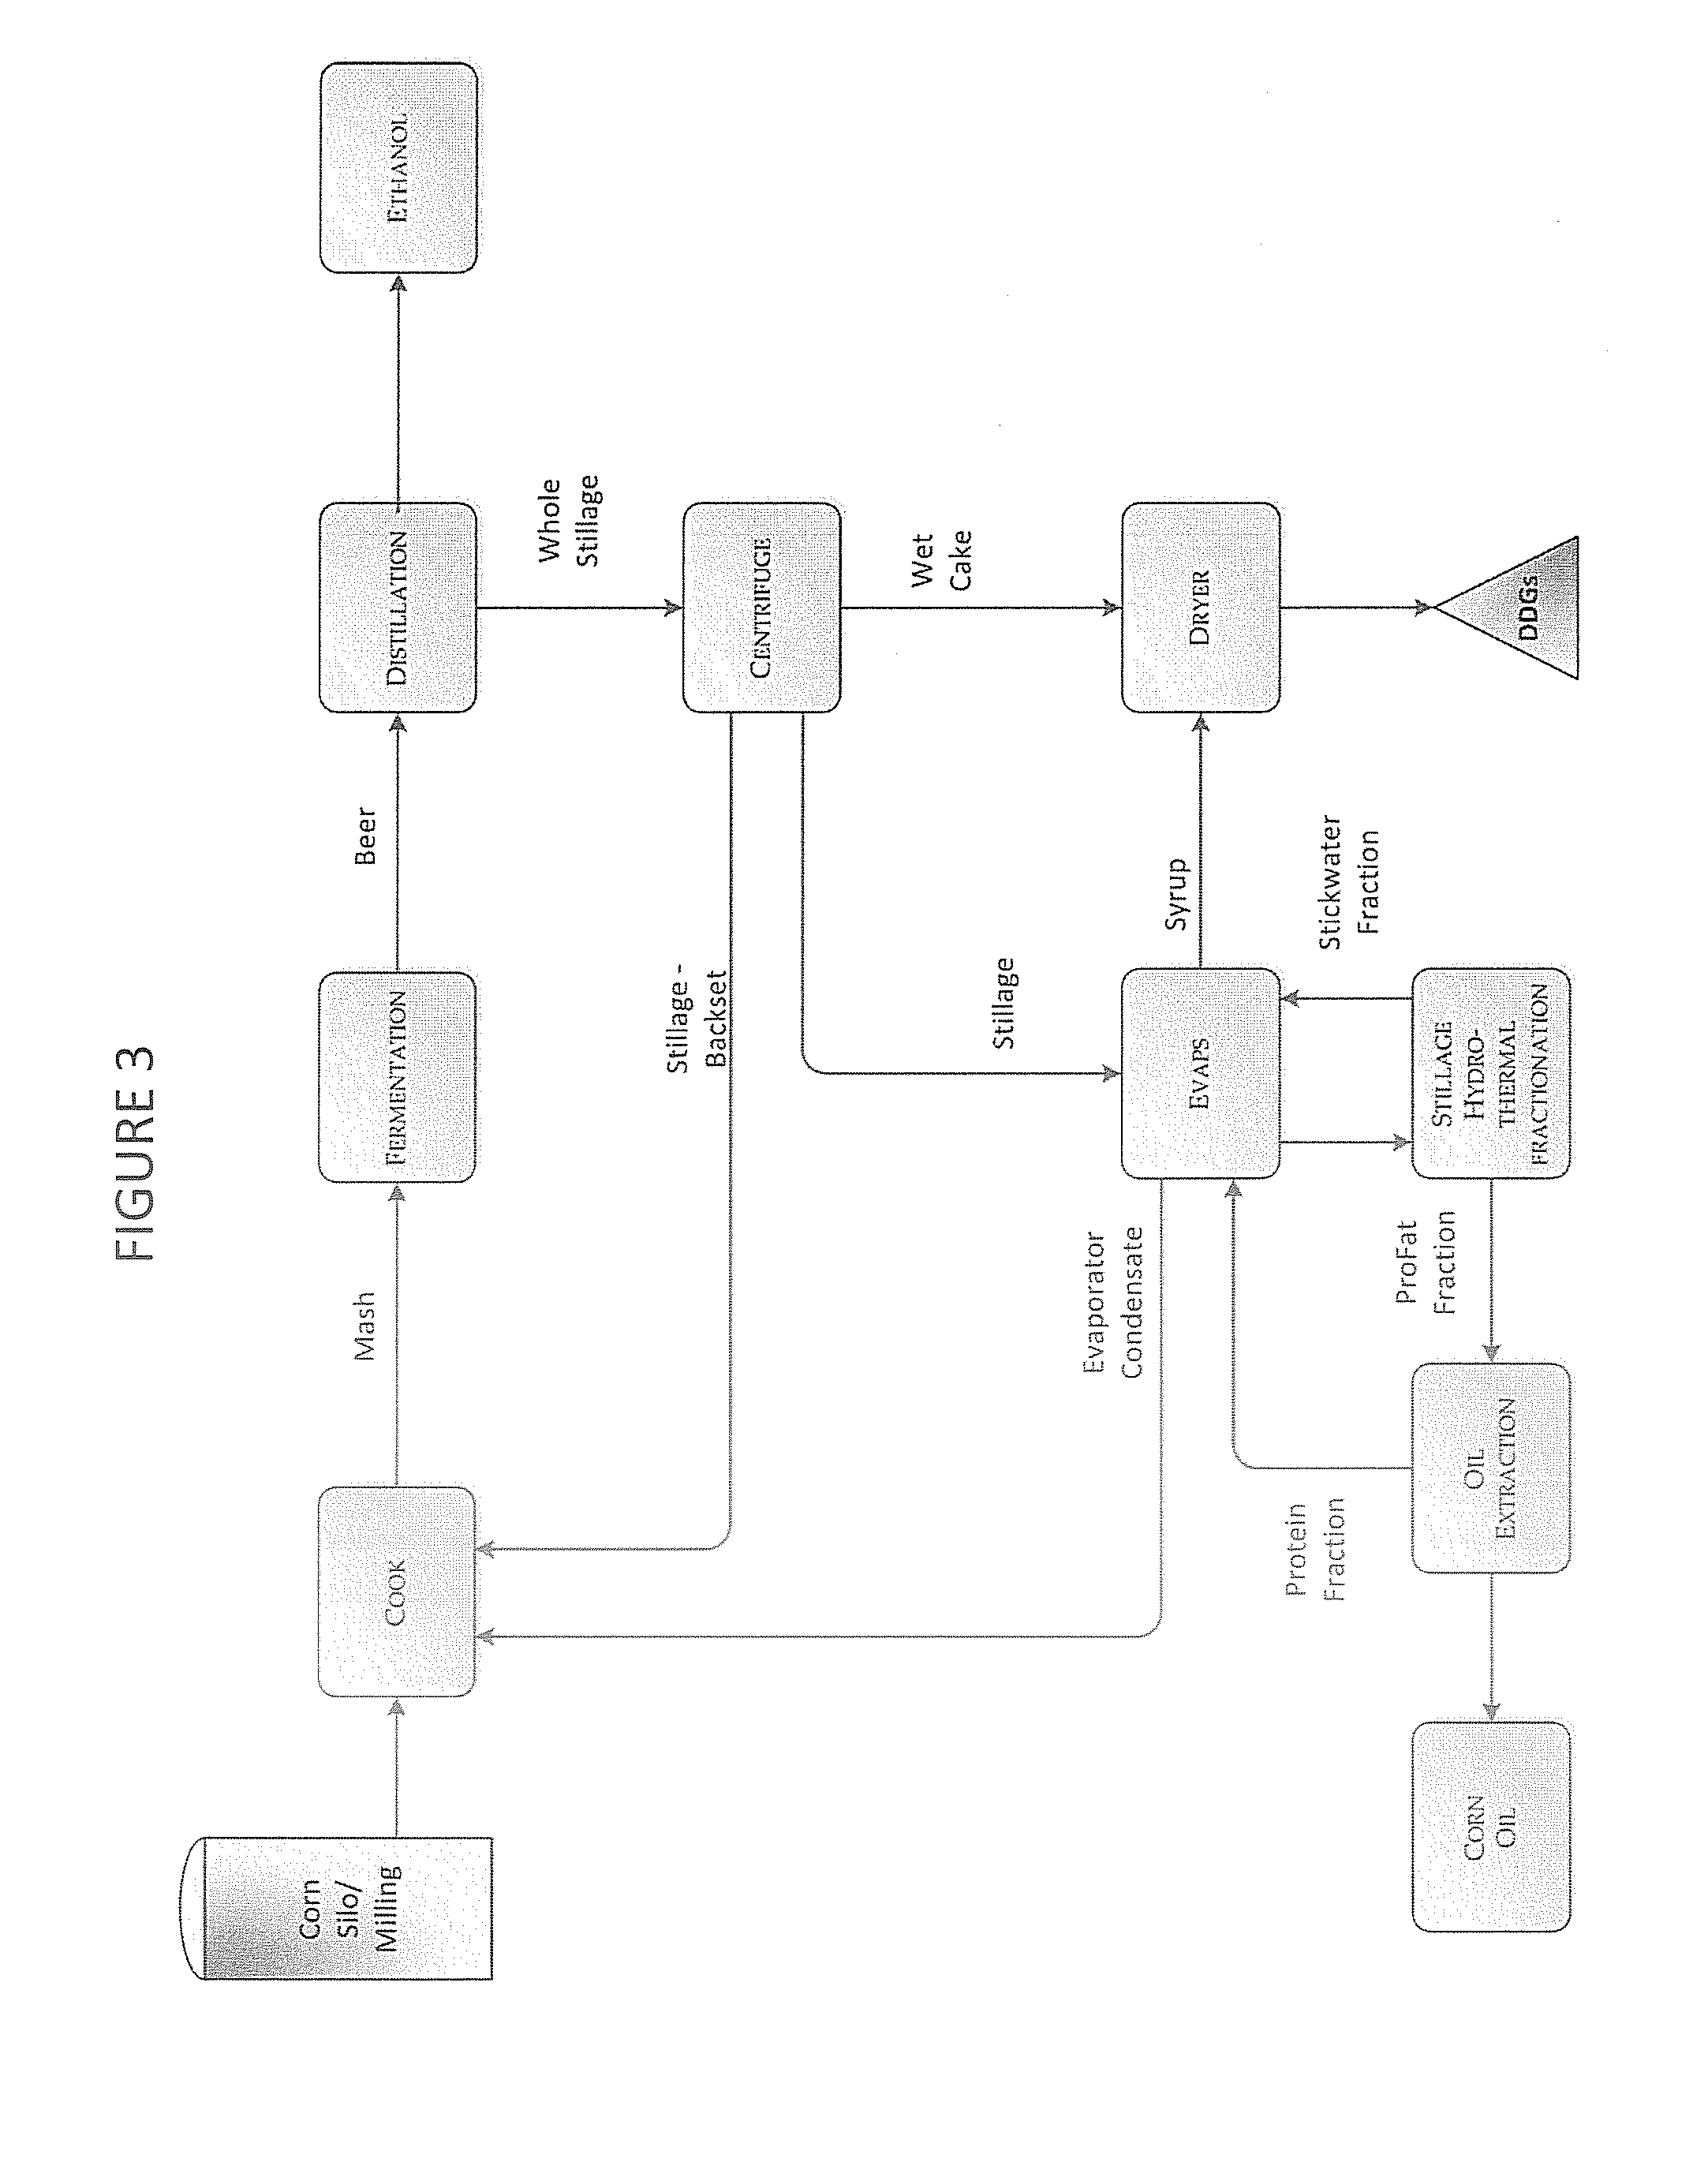 Process and method for improving the water reuse, energy efficiency, fermentation, and products of an ethanol fermentation plant